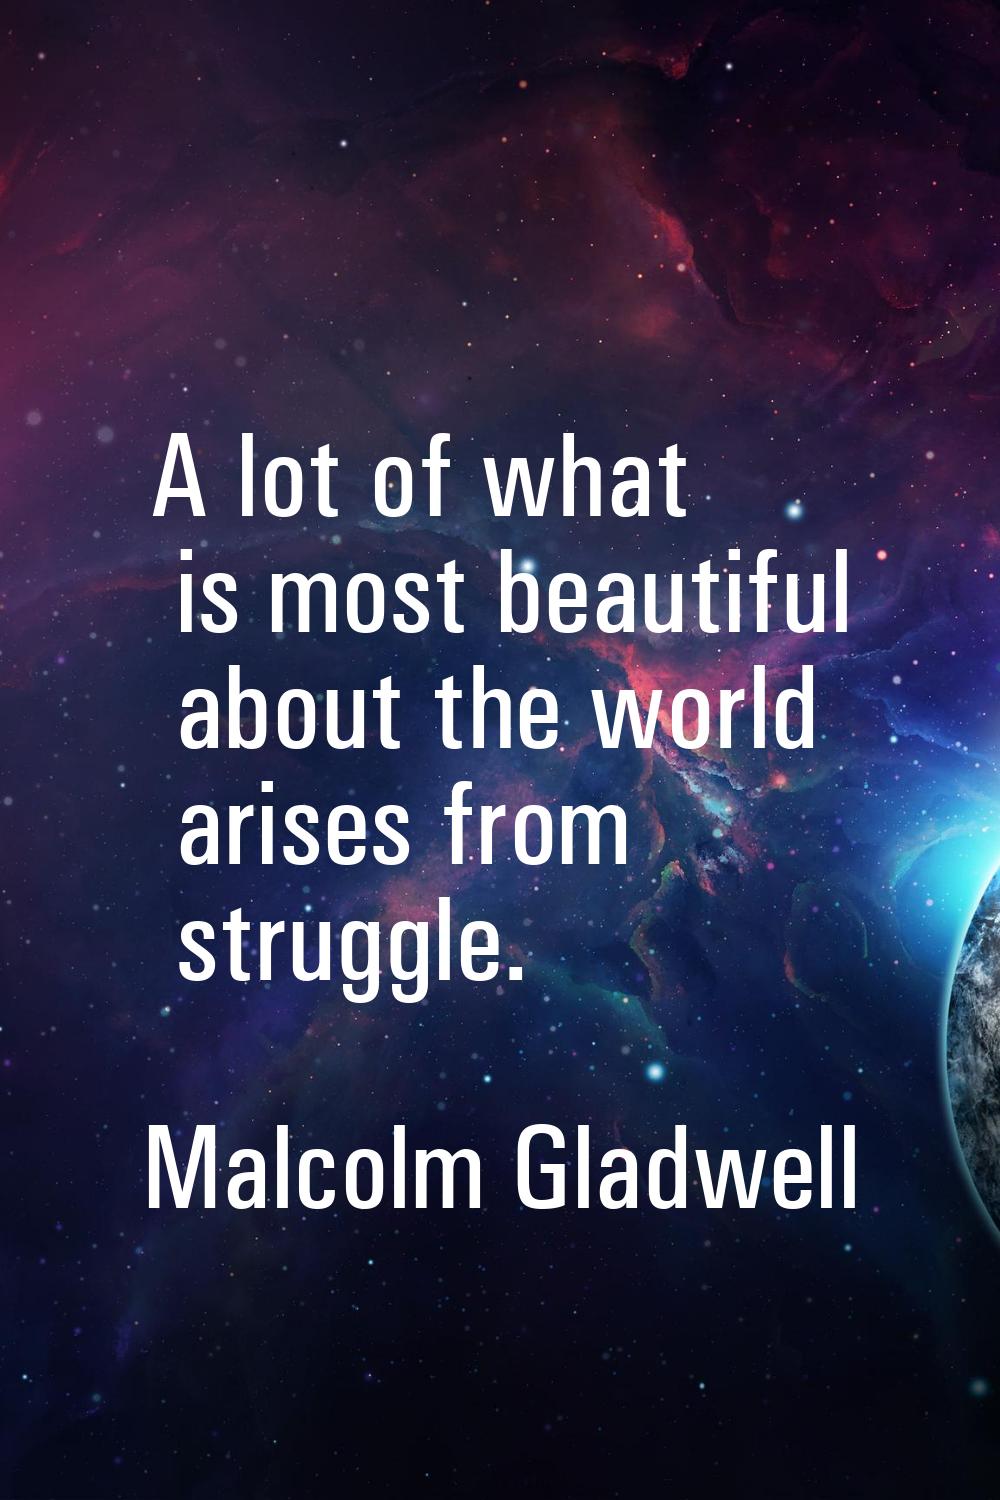 A lot of what is most beautiful about the world arises from struggle.